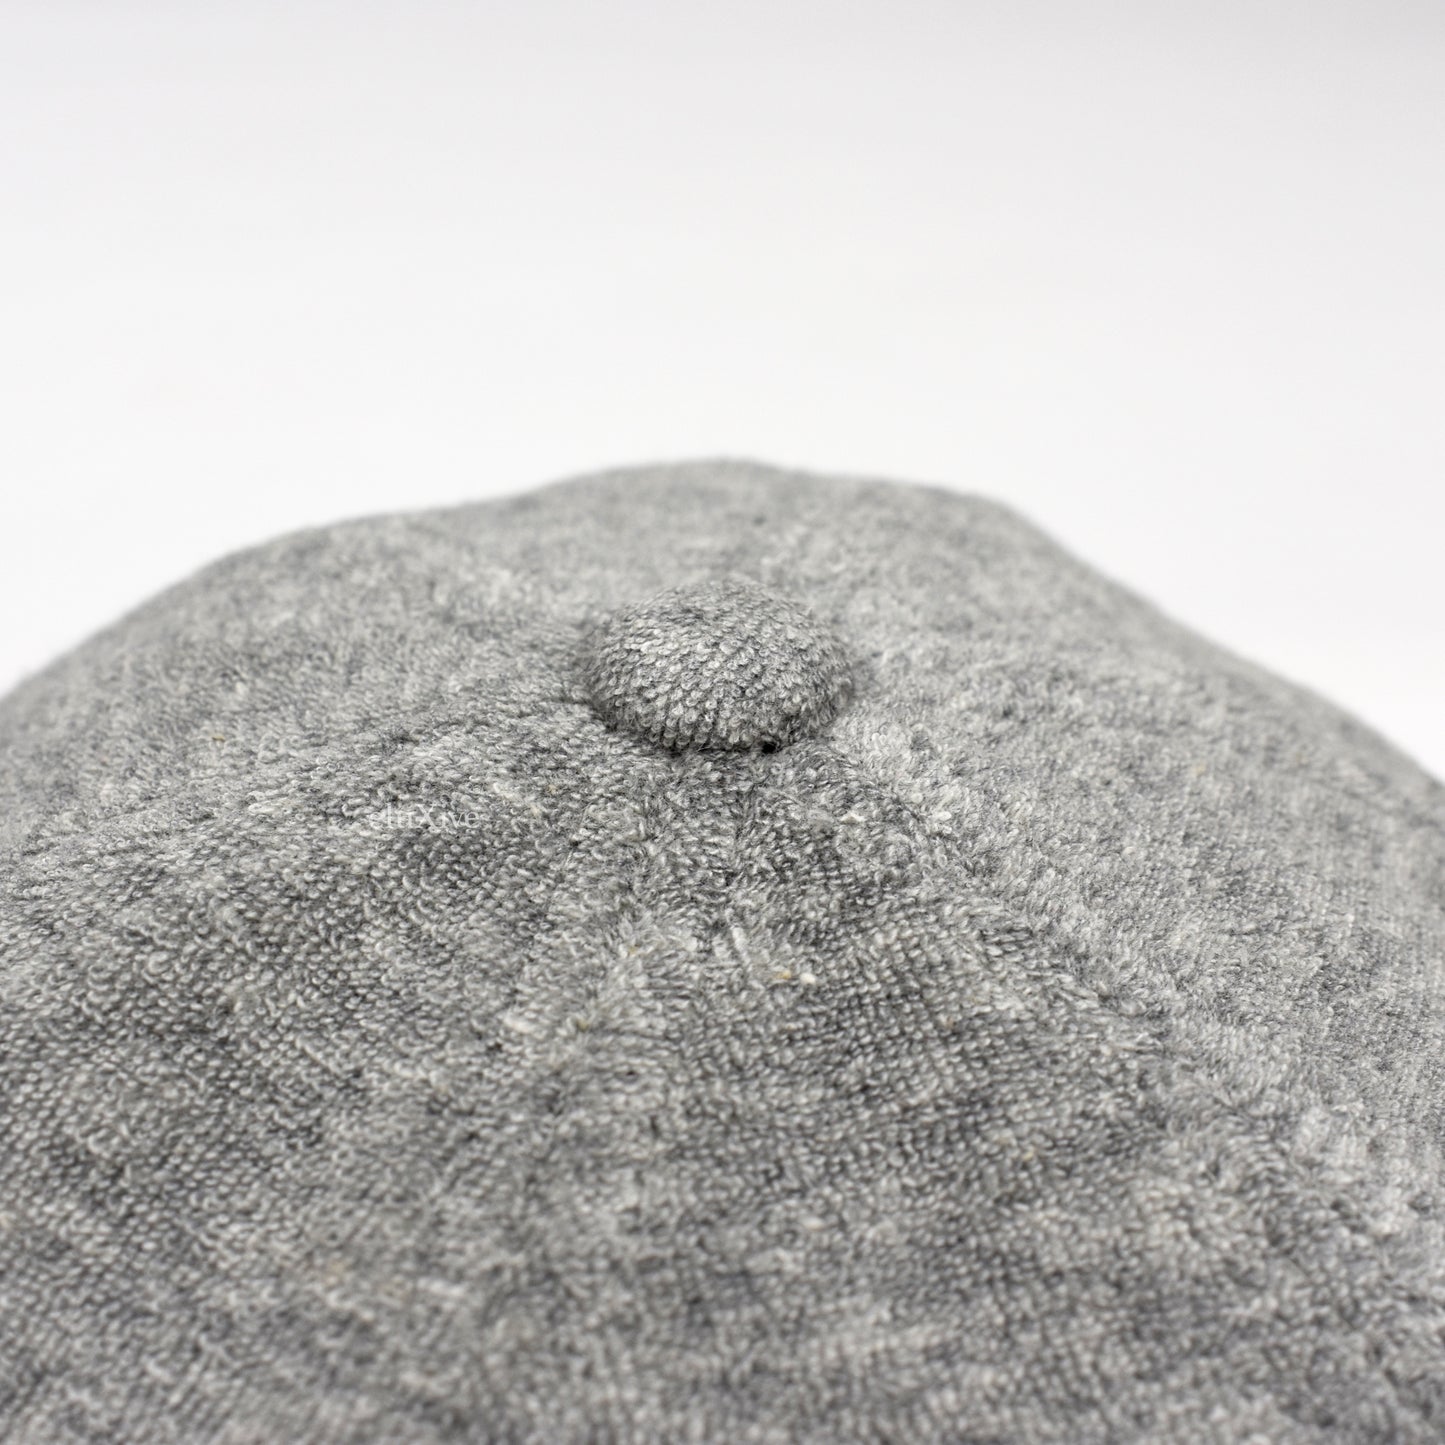 Palace - Towelling P-Logo Hat (Gray)